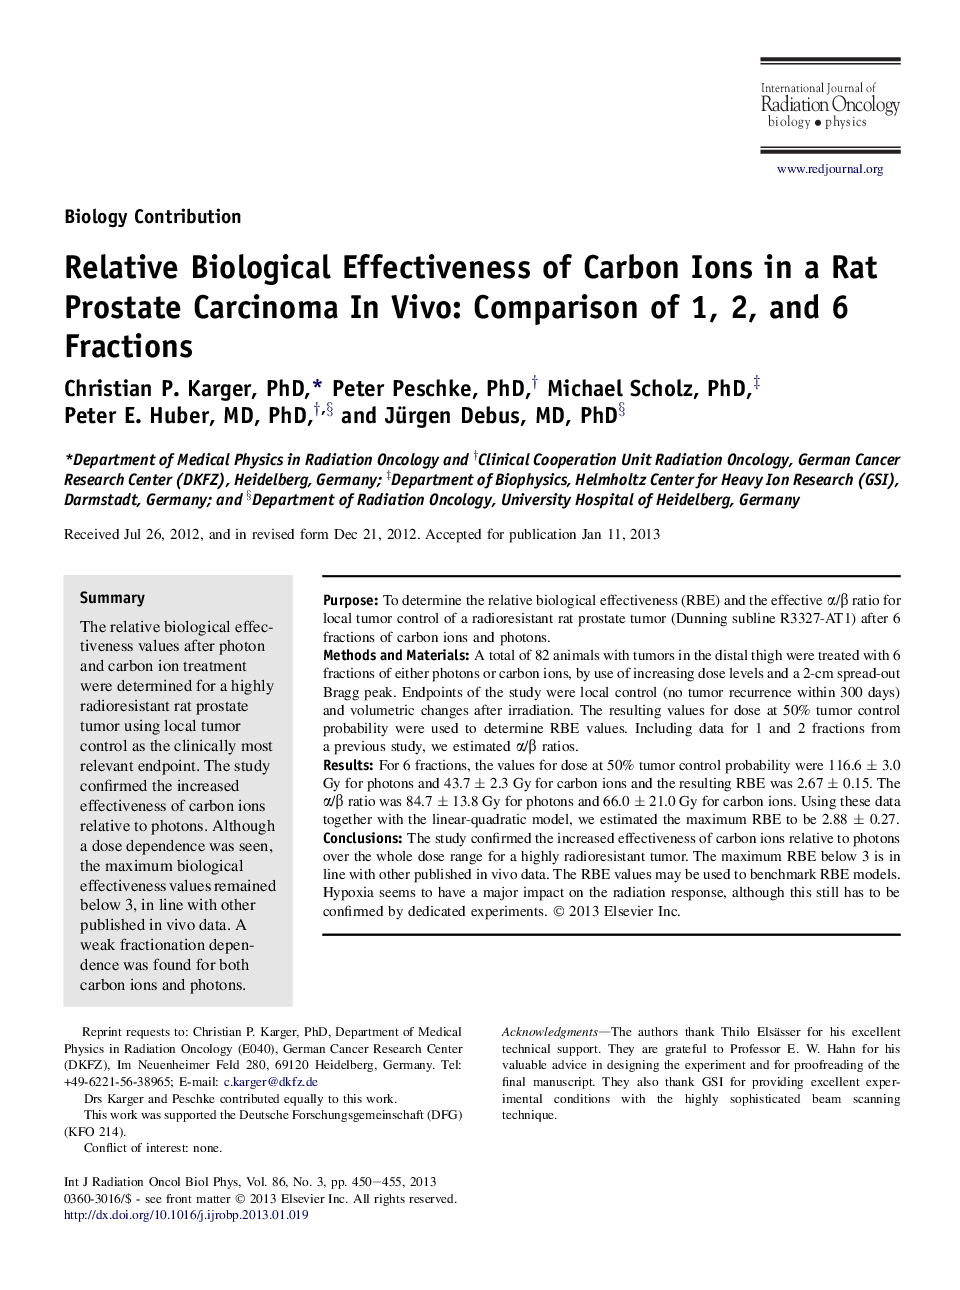 Relative Biological Effectiveness of Carbon Ions in a Rat Prostate Carcinoma In Vivo: Comparison of 1, 2, and 6 Fractions